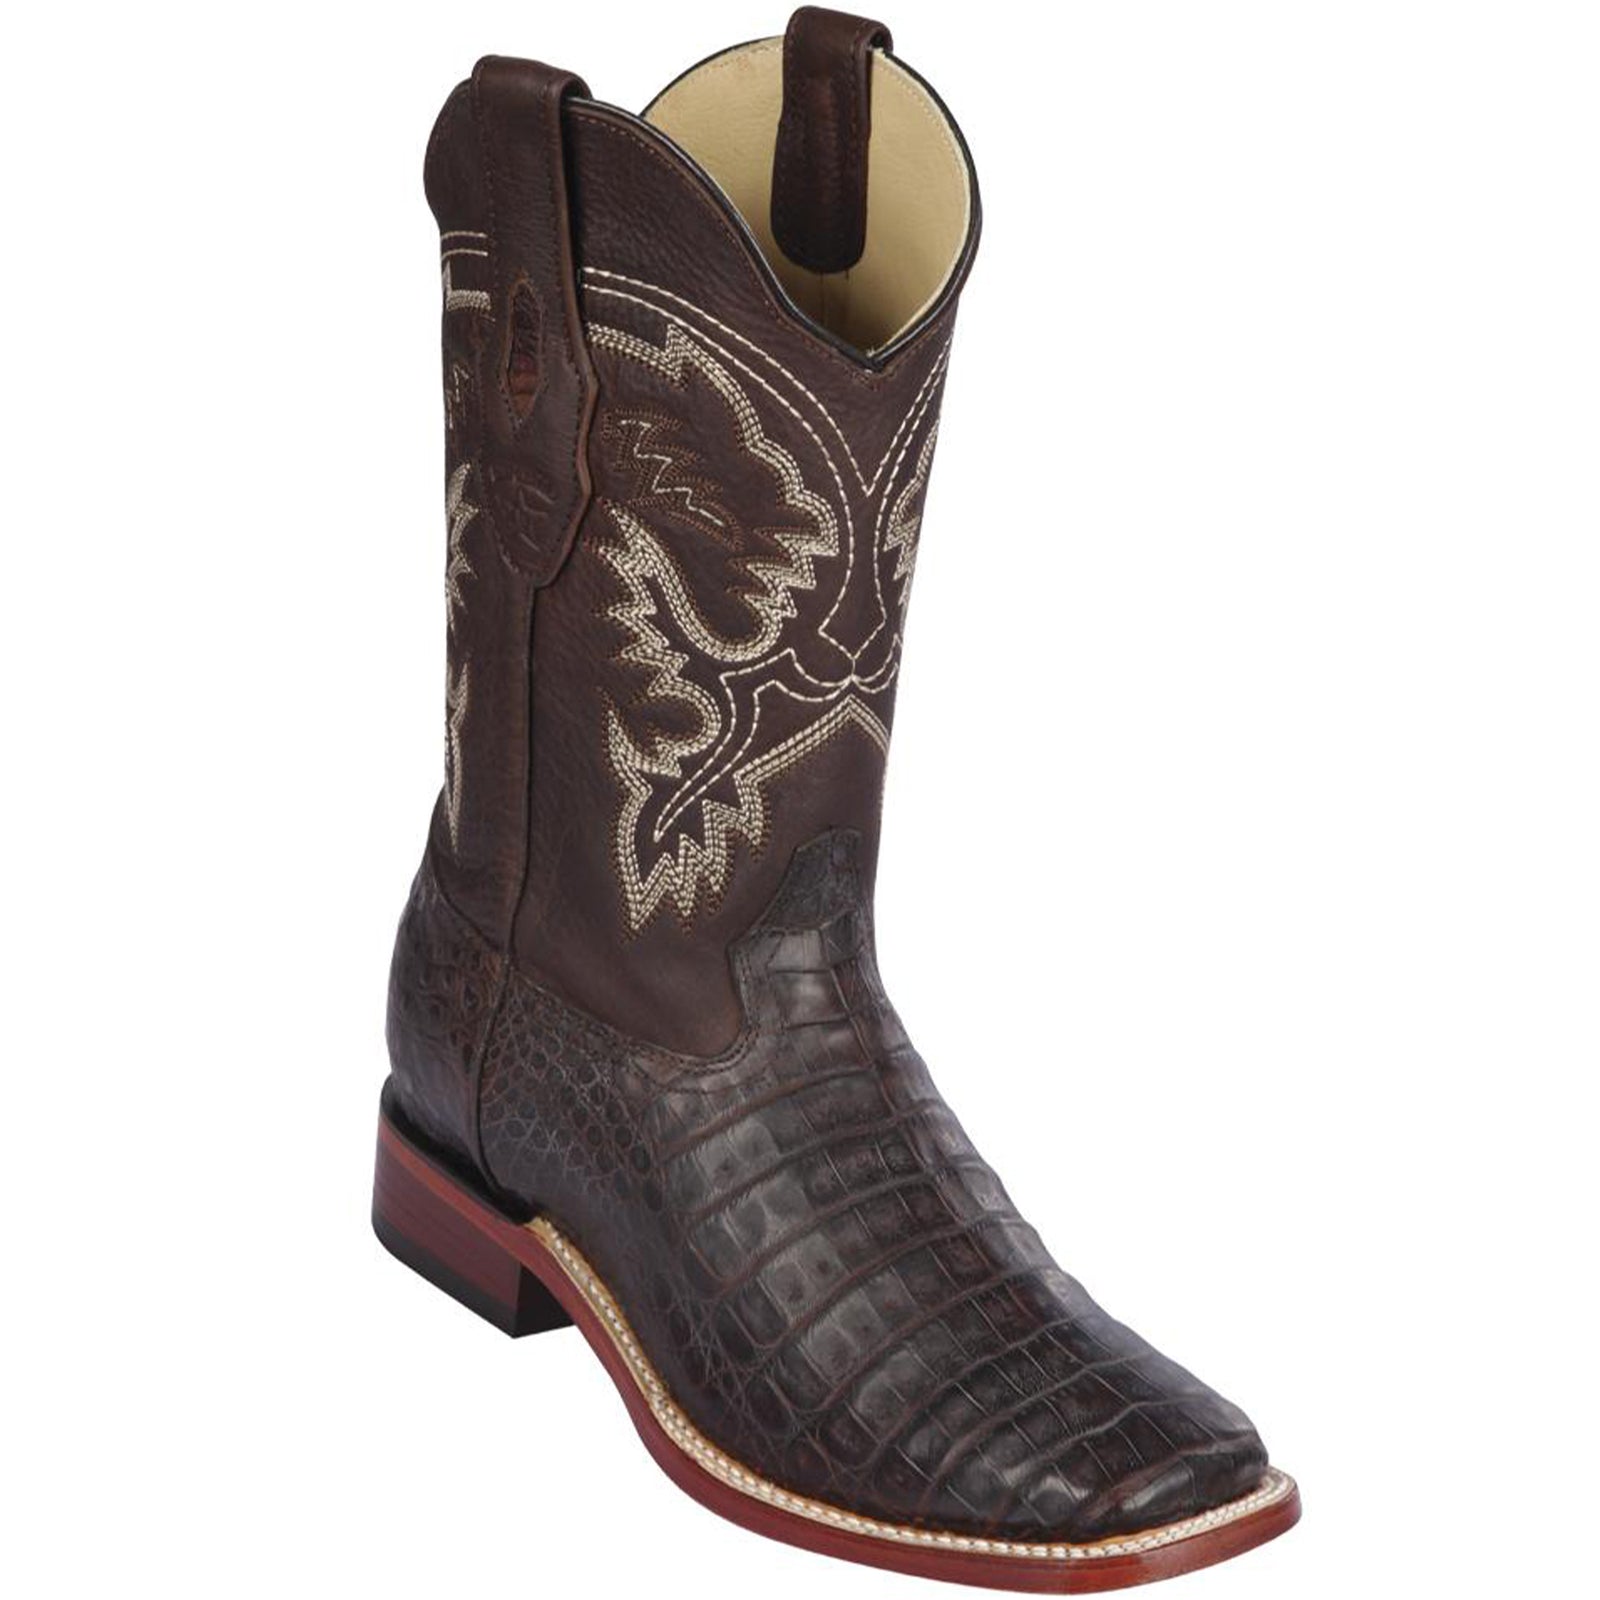 caiman belly boots